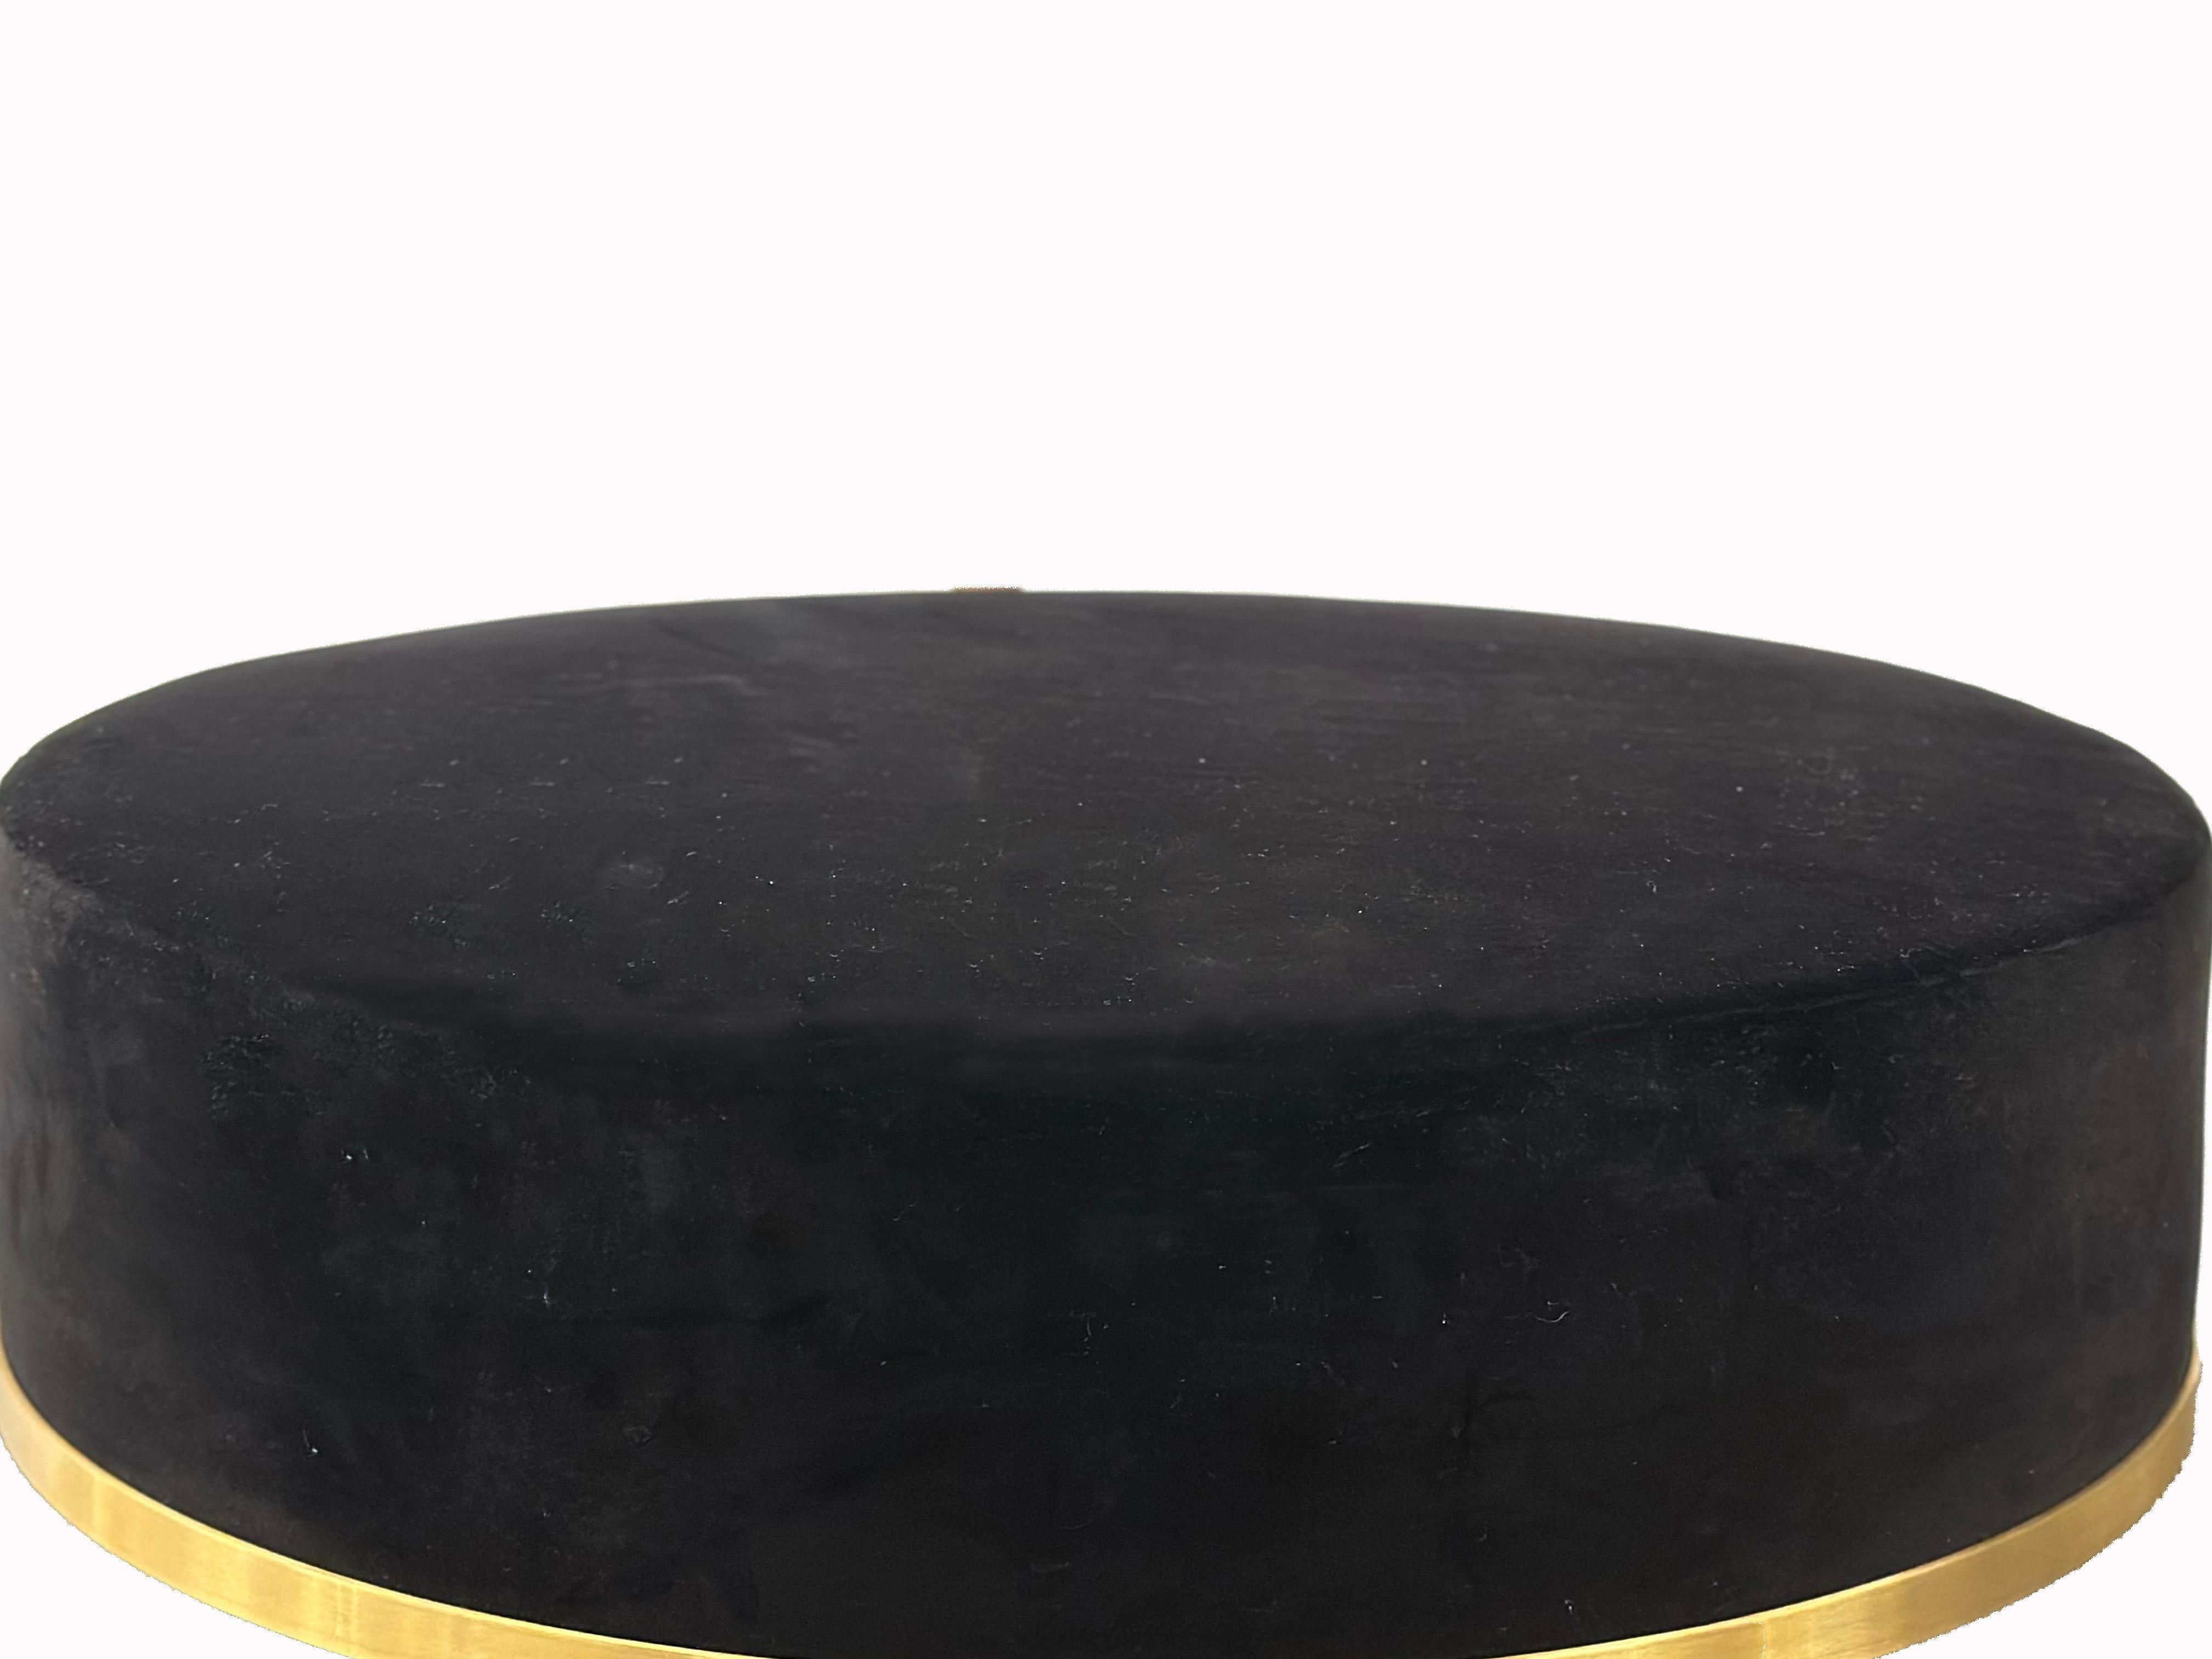 Brand new ottoman with genuine horsehair skirt banded with polished brass trim. Upholstered in chocolate color velvet.